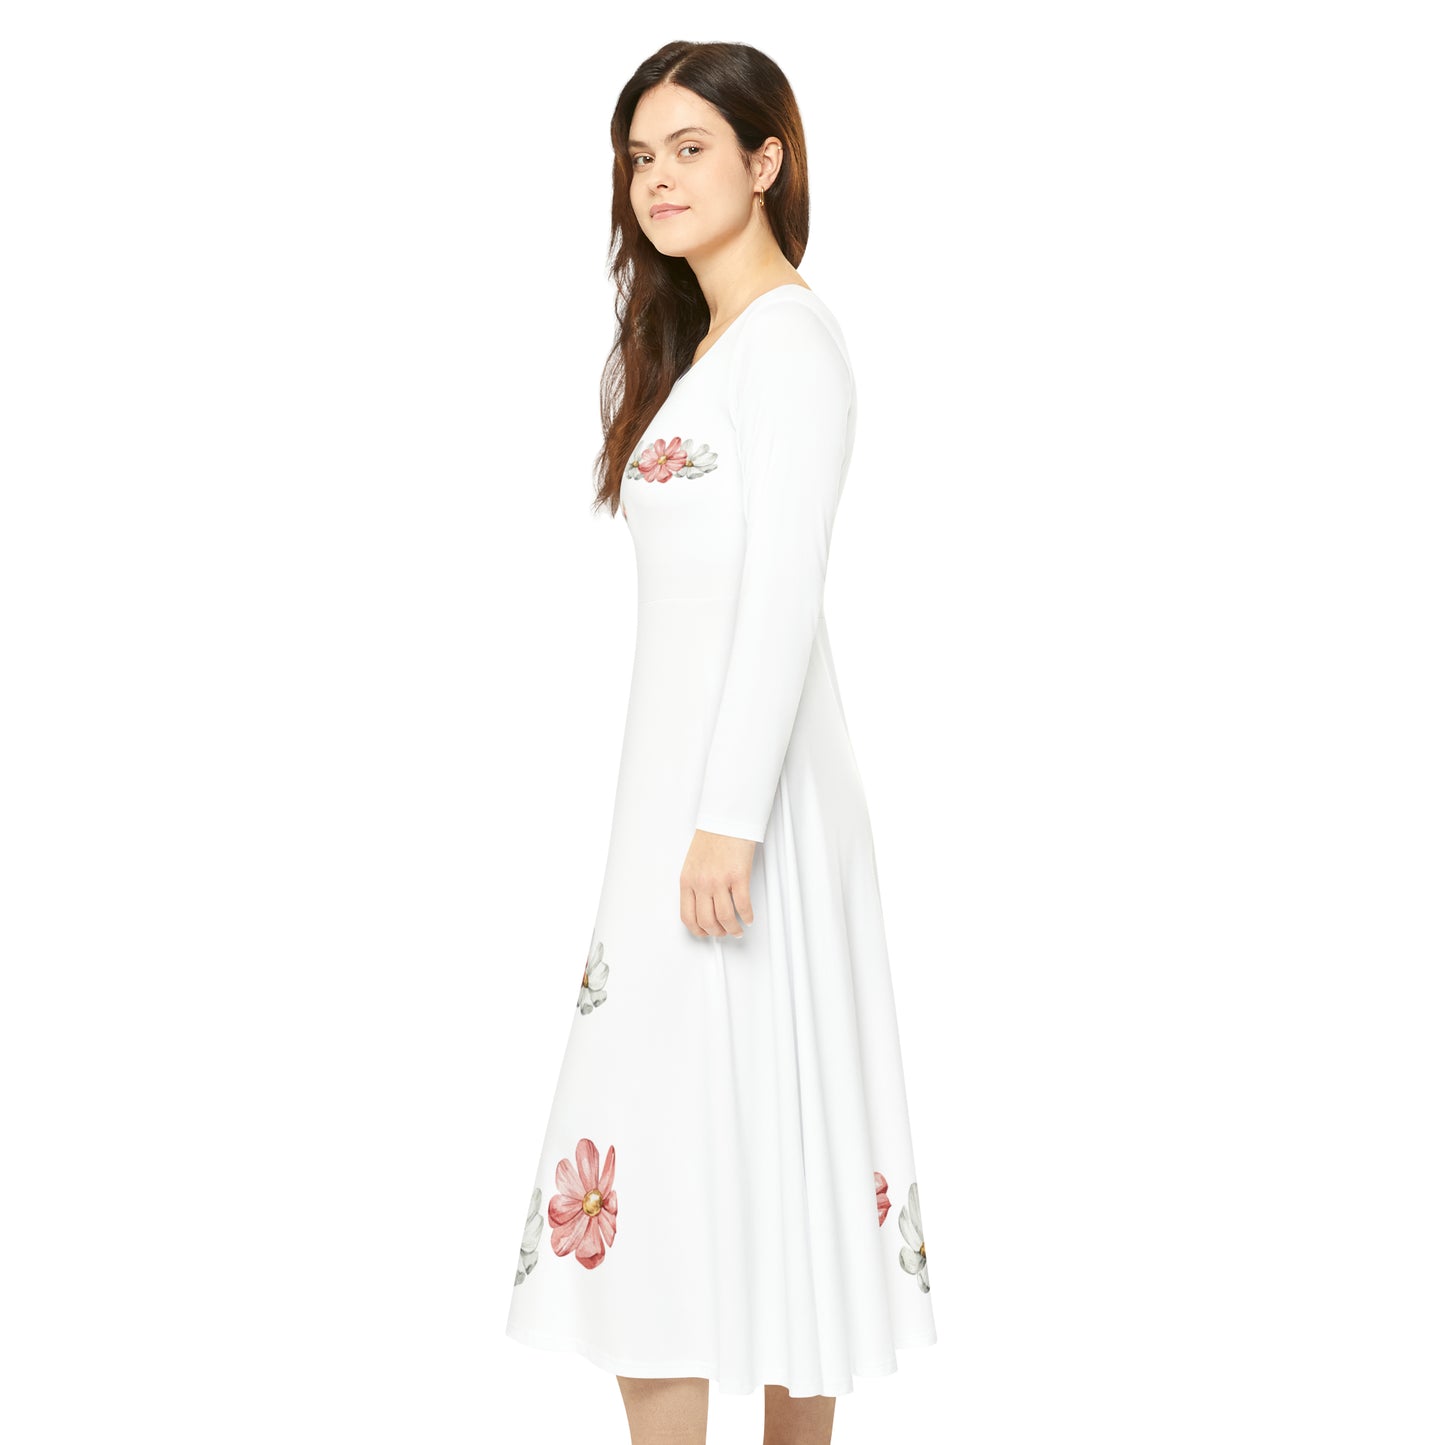 Holy Mary surrounded By Flowers  -Long Sleeve Dress Christian Collection